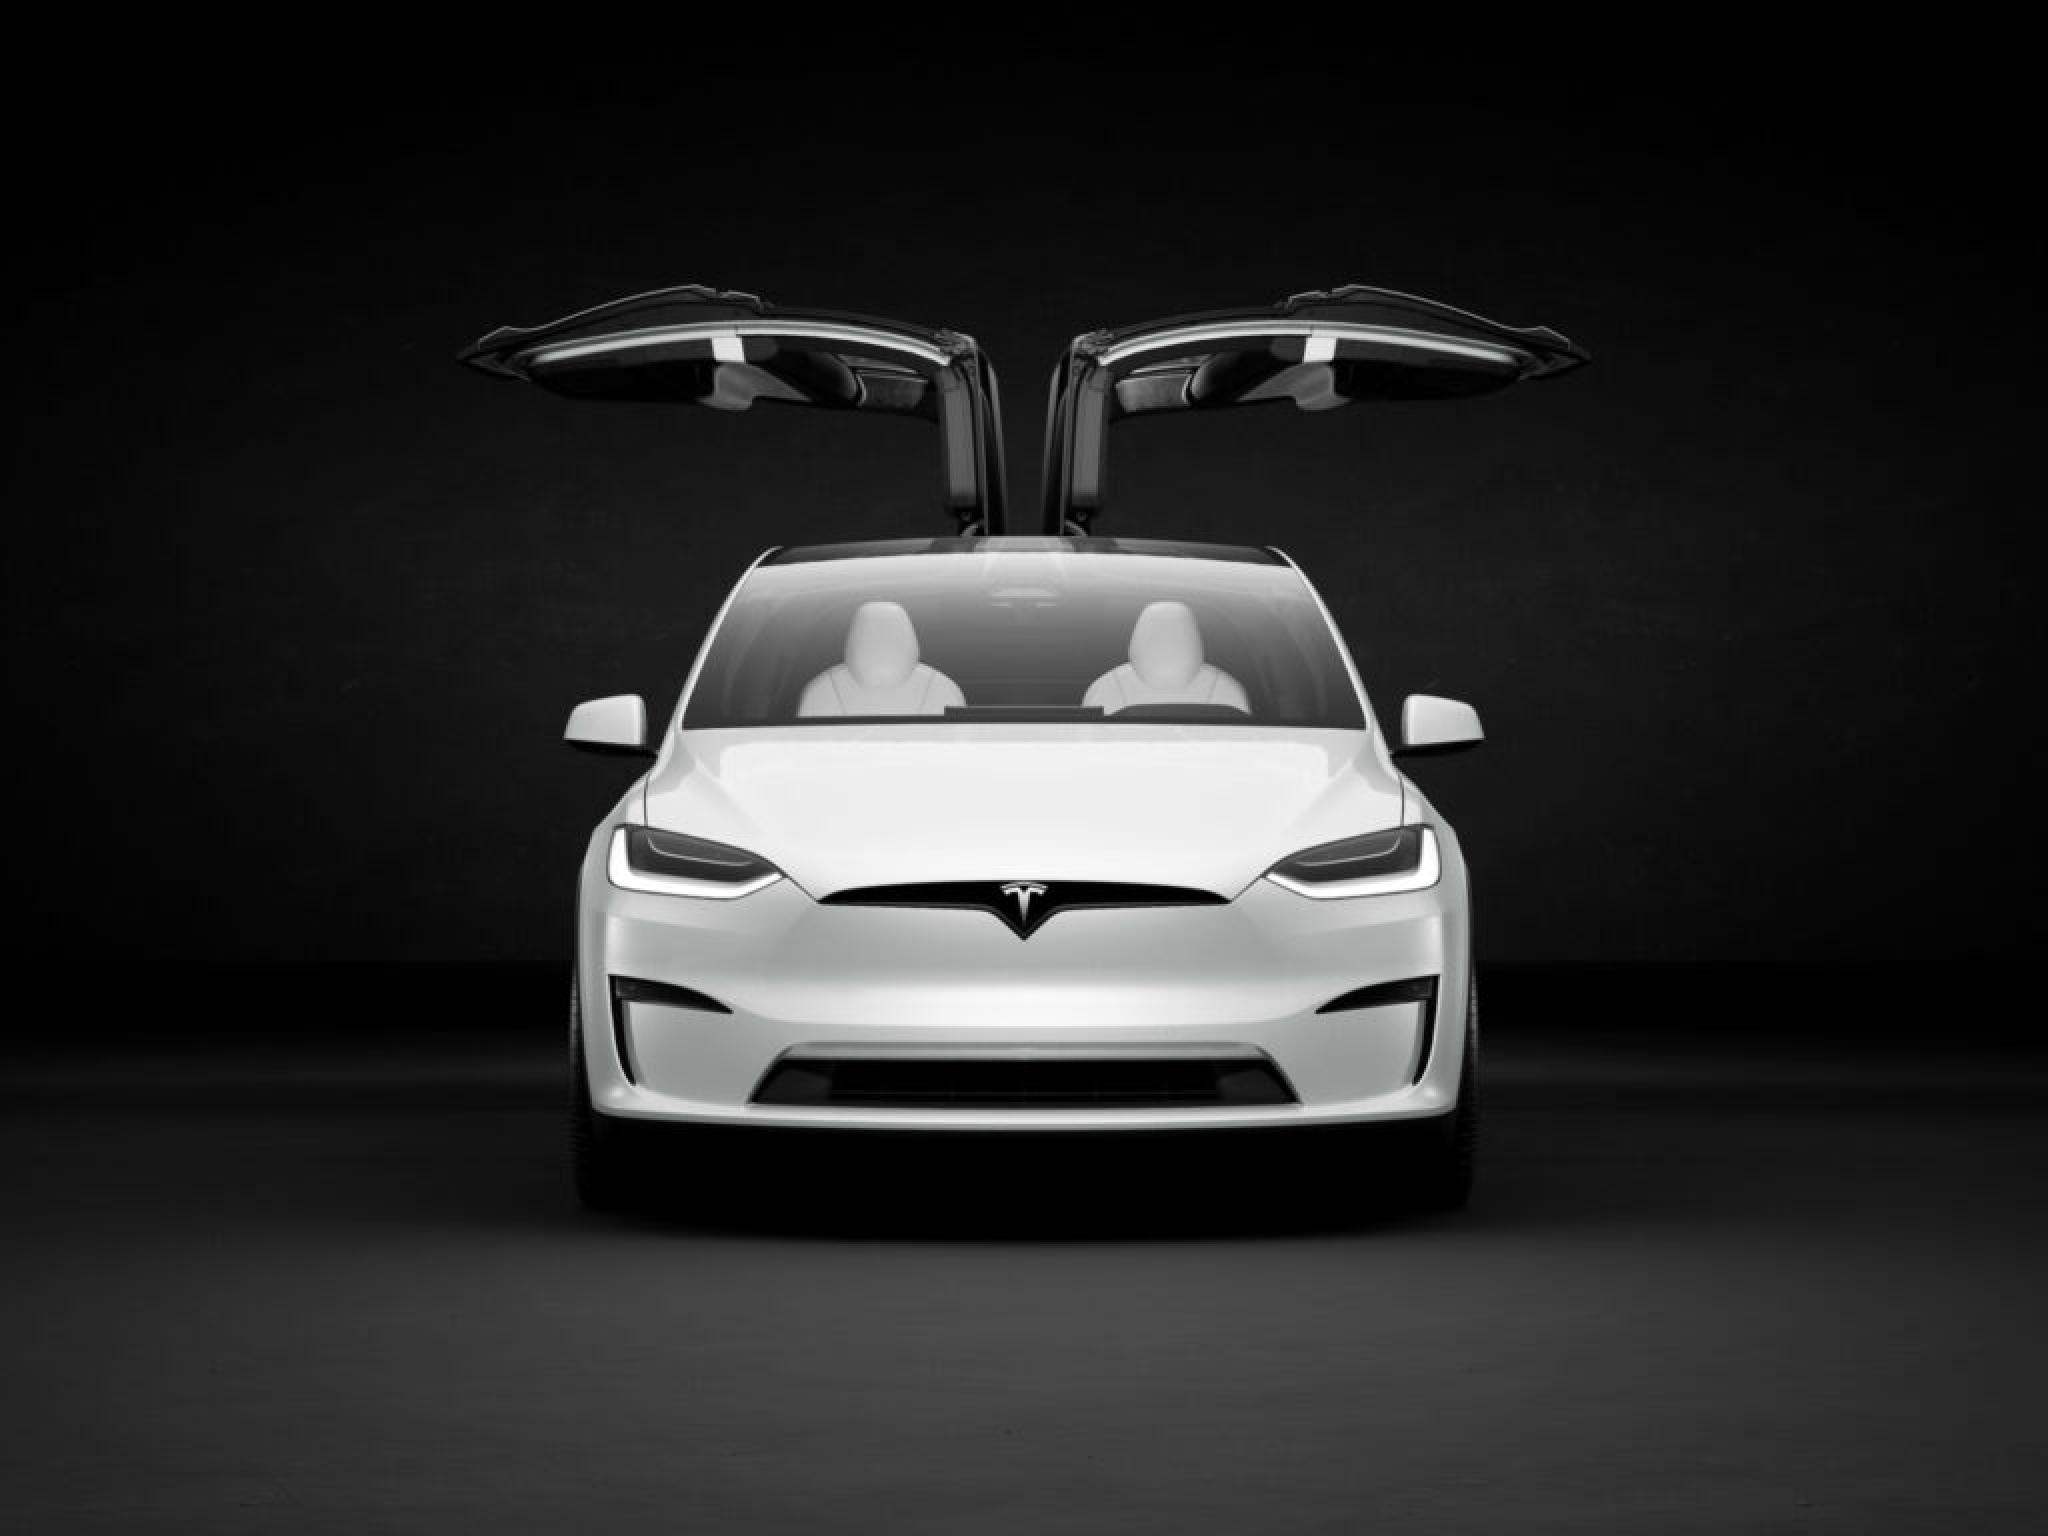  tesla-seat-belt-scare-over-nhtsa-closes-year-long-model-x-probe-after-recall-of-nearly-16k-evs 